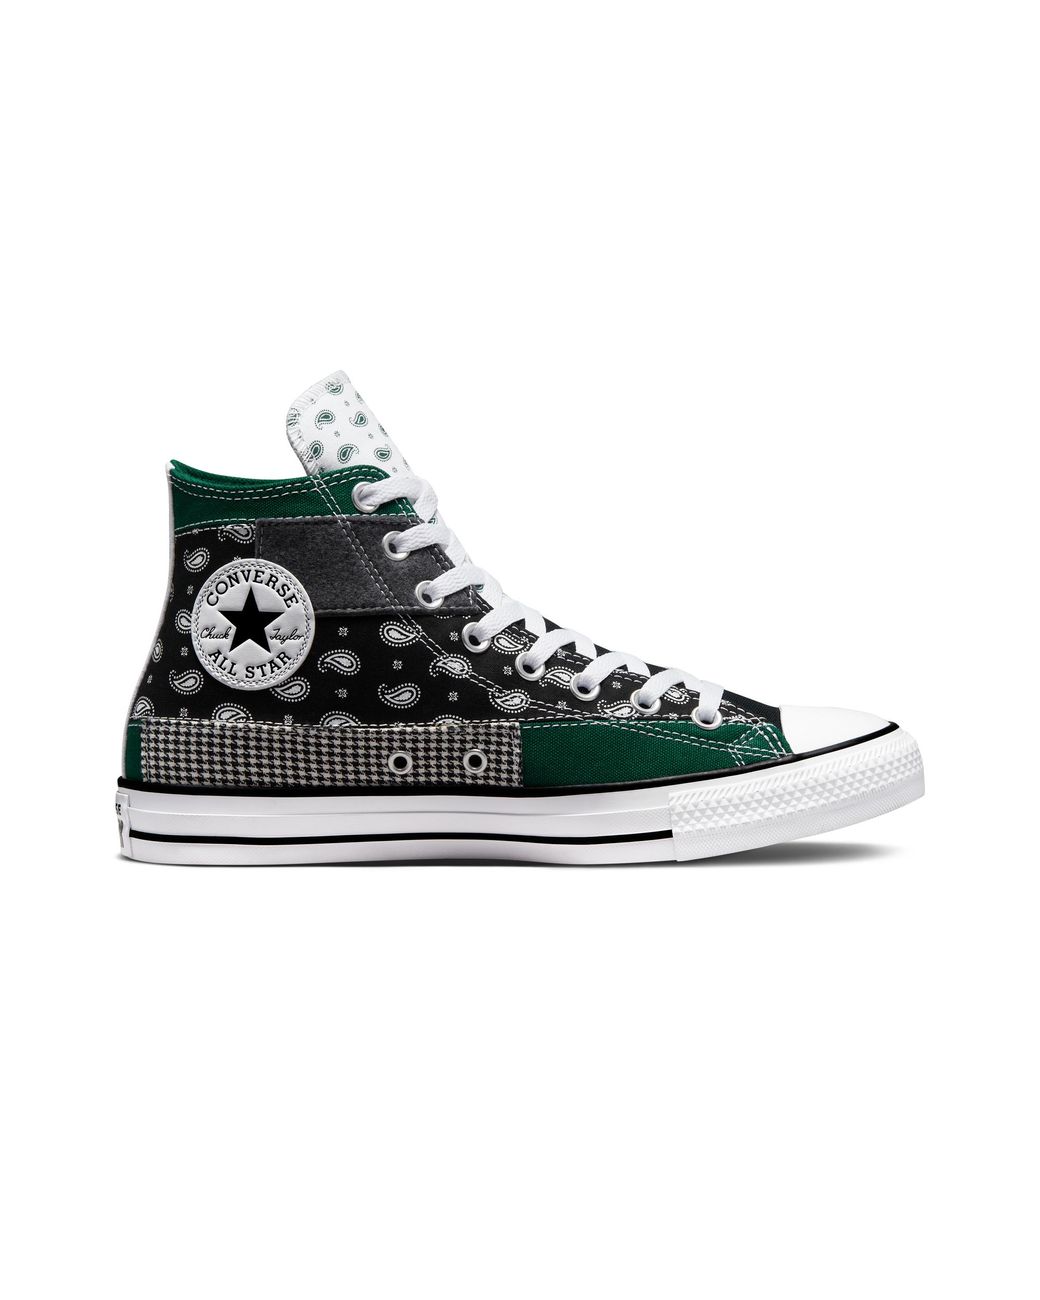 Converse Chuck Taylor All Star Hacked Patterns in Black | Lyst